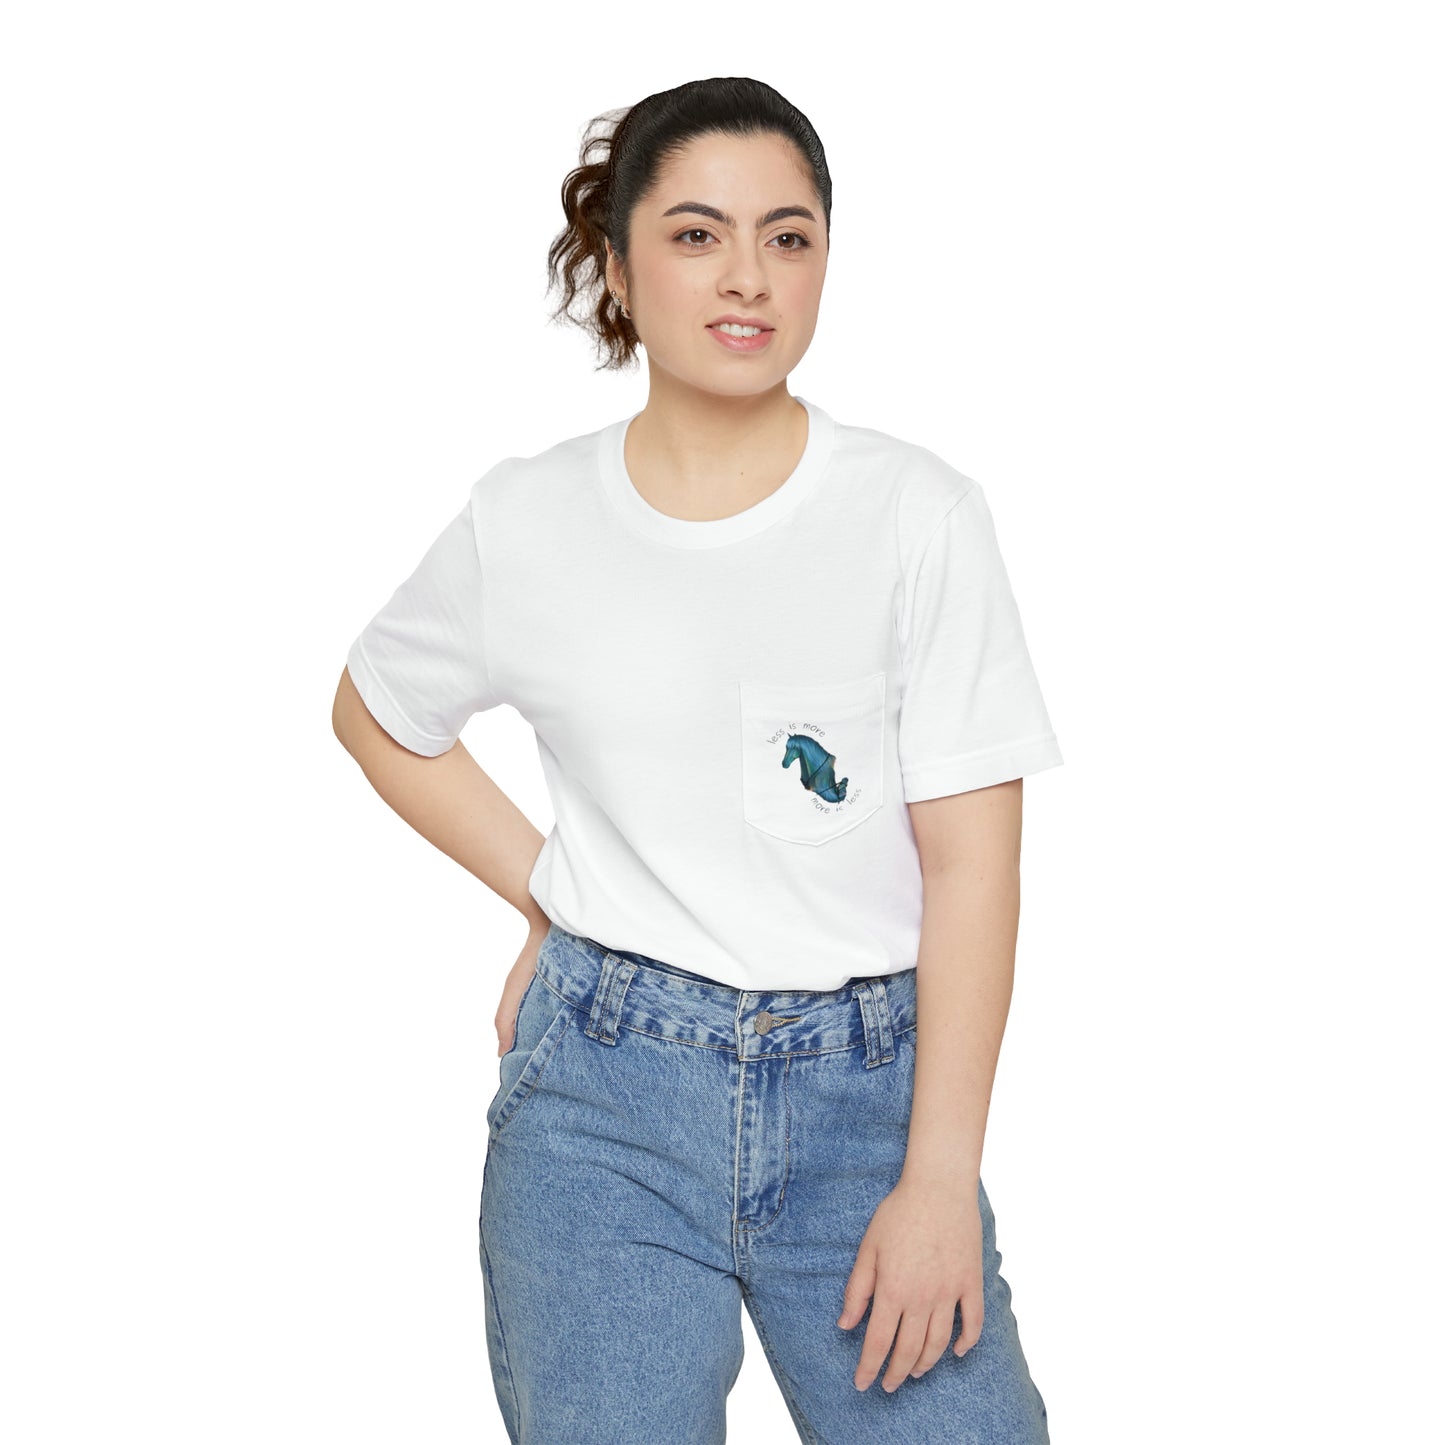 Less is More Pocket T-shirt